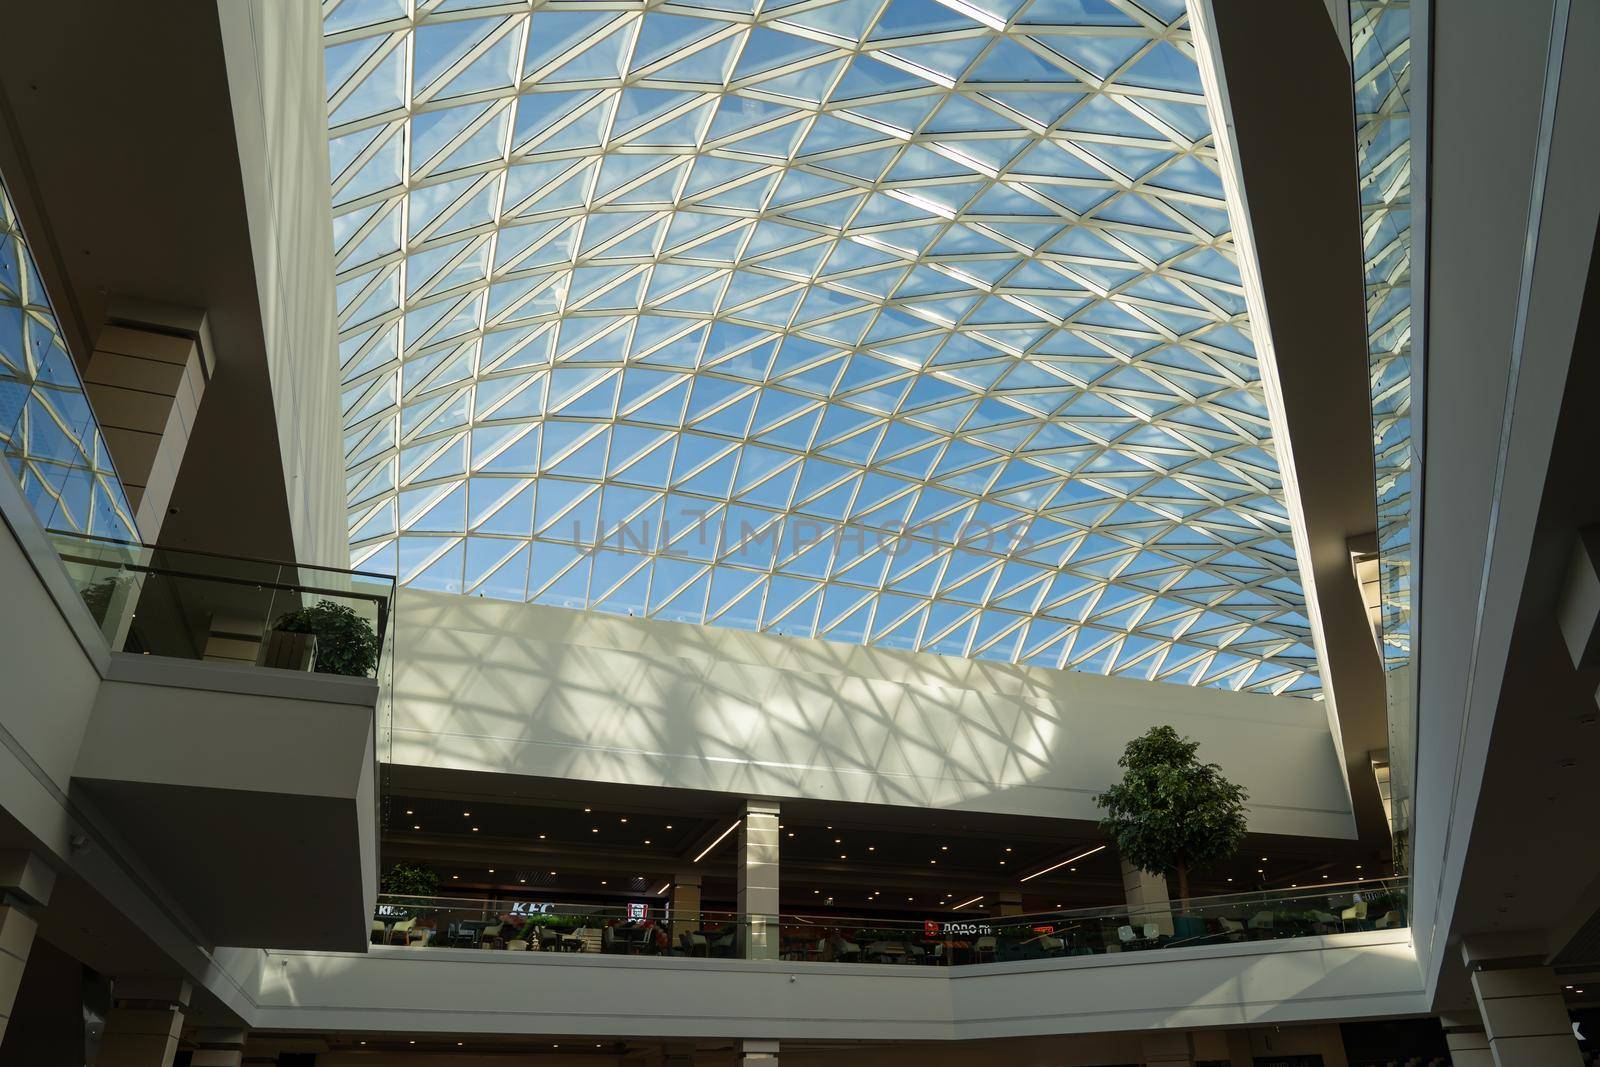 Grodno, Belarus - April 07, 2021: The interior of the modern large shopping and entertainment complex Trinity with a transparent glass roof.